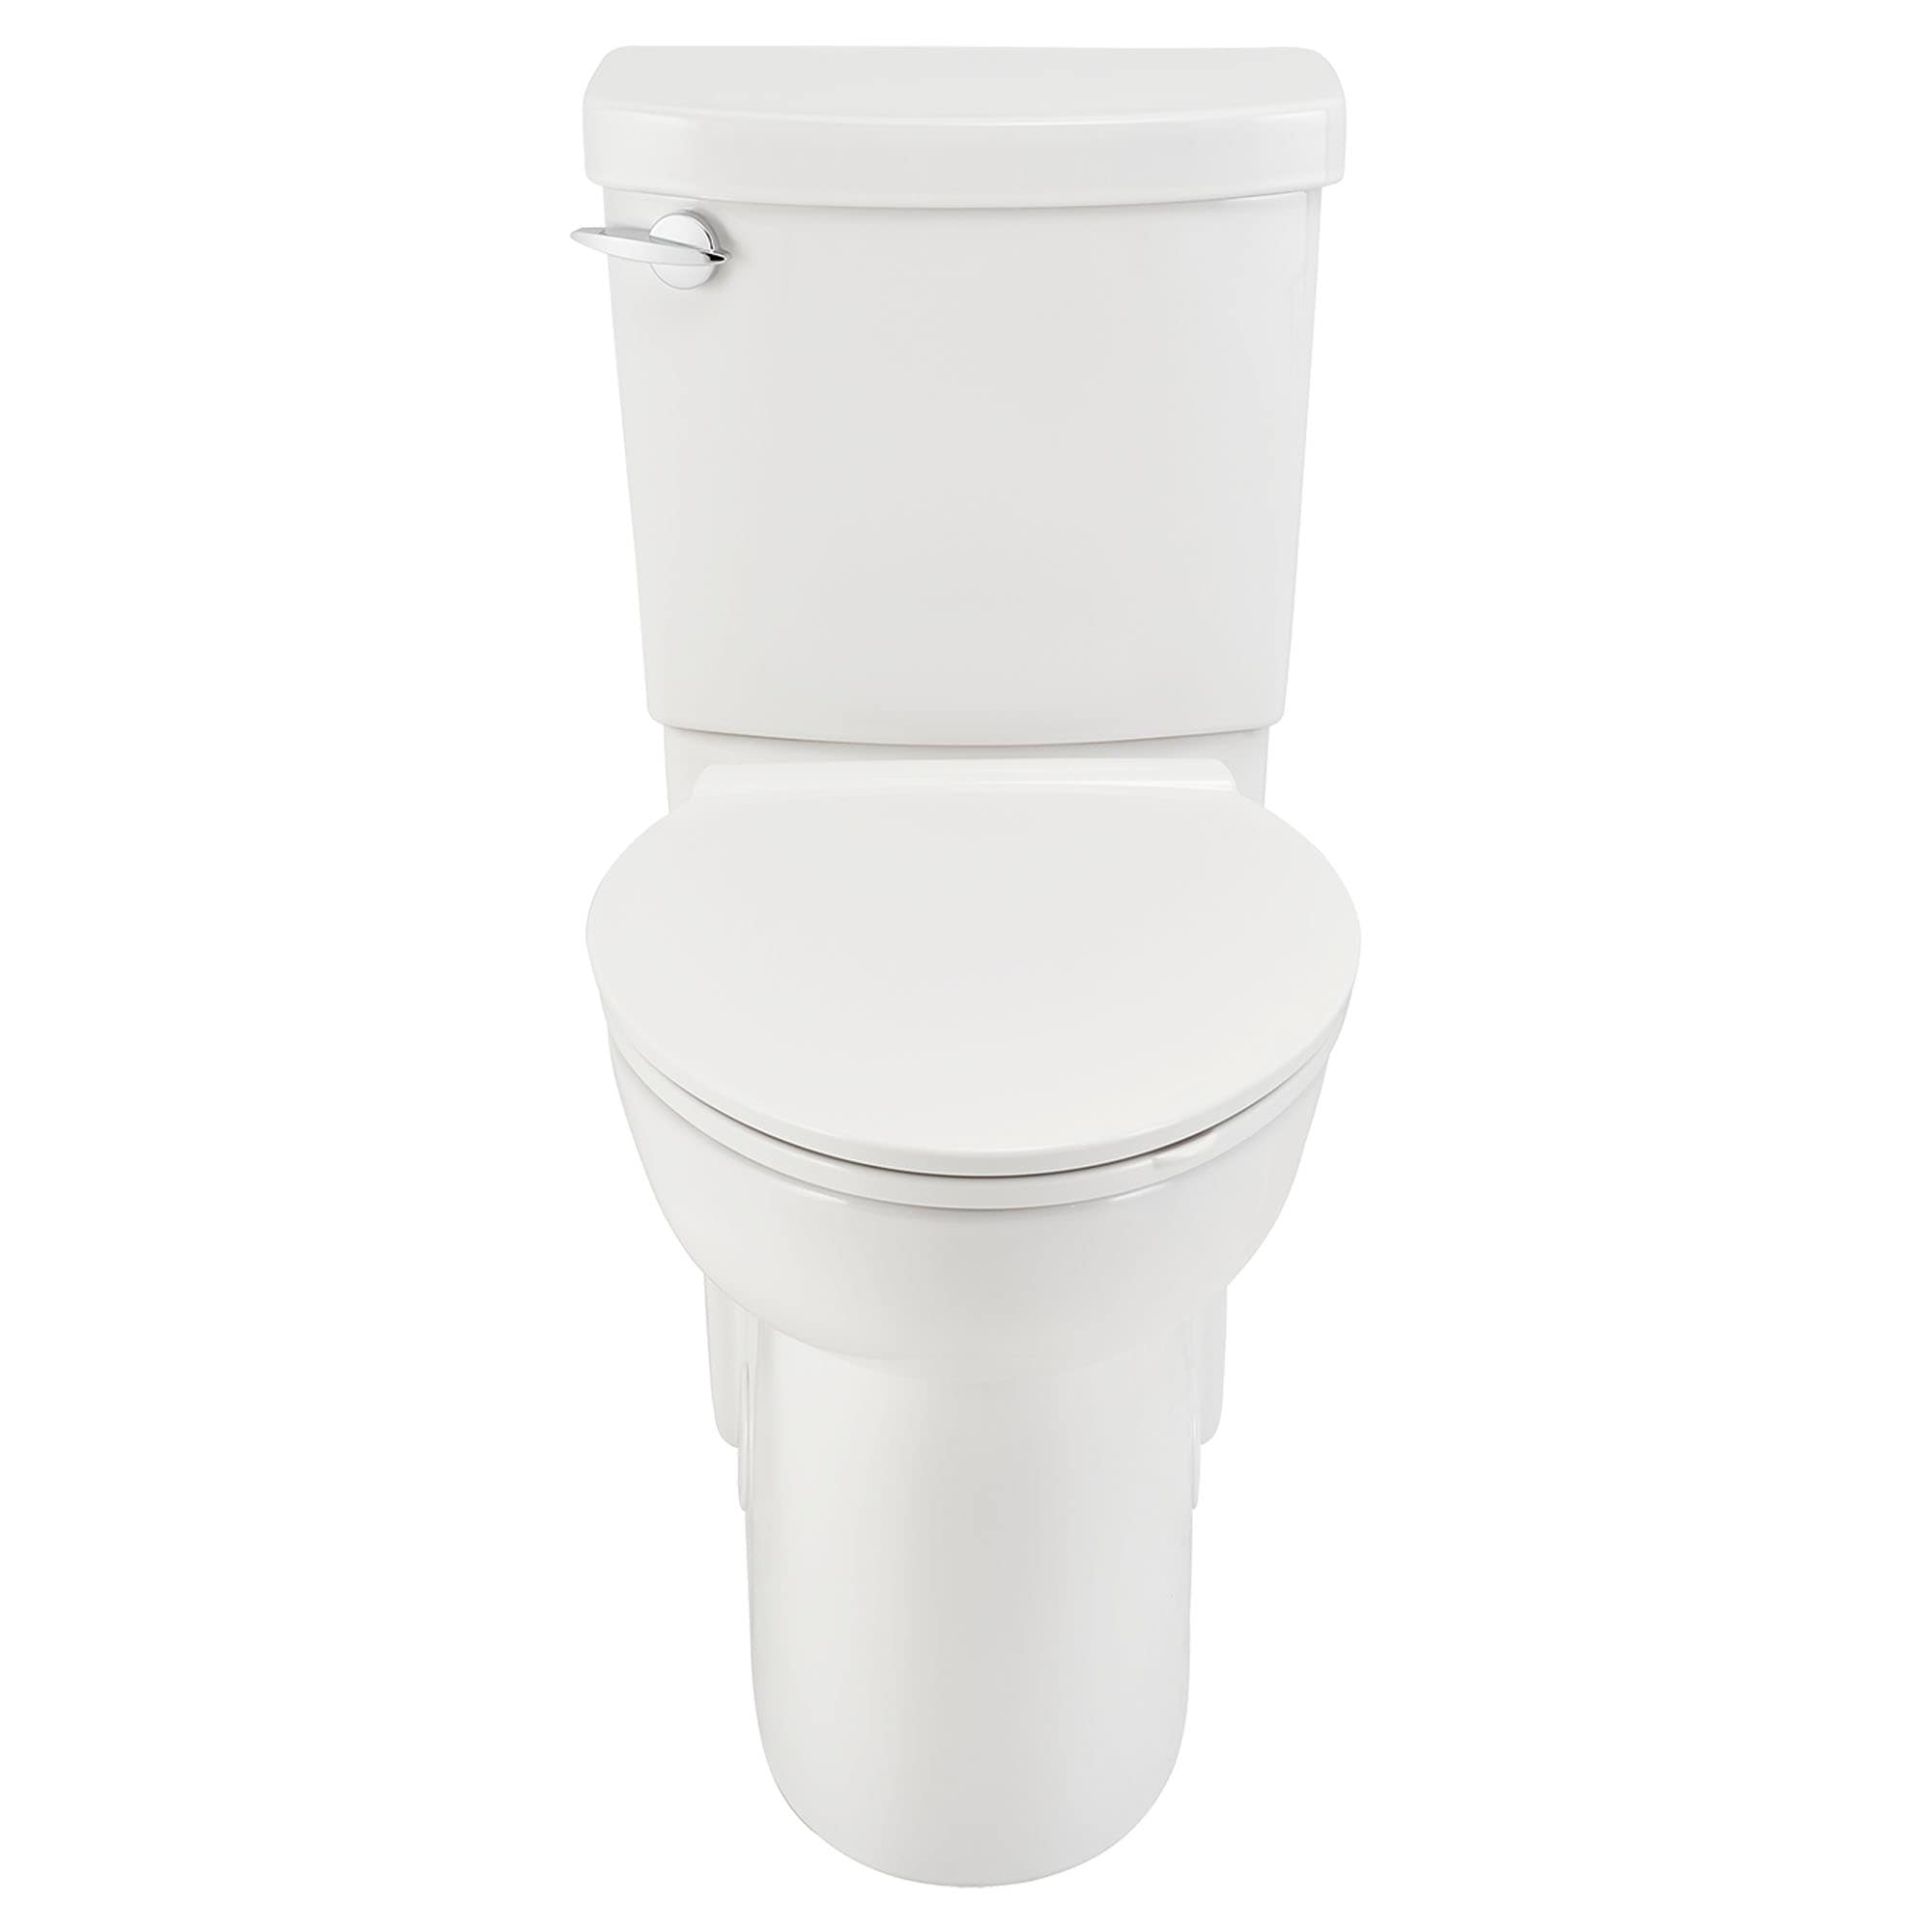 Wholesale toilet flush kits For Toilets In The Home Or Office 